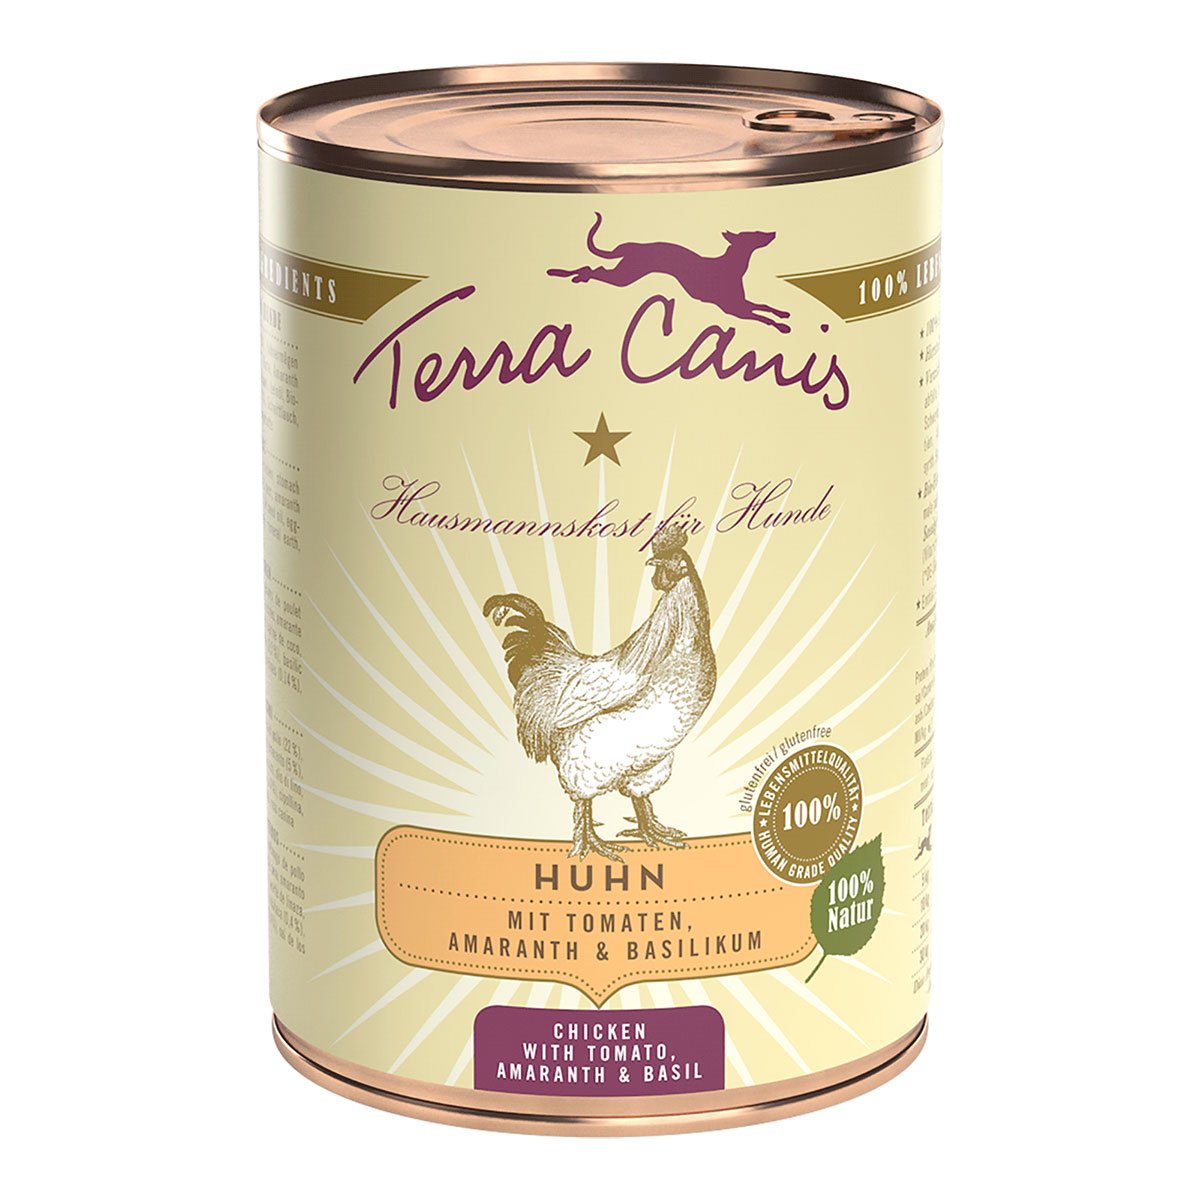 Terra Canis CLASSIC – Huhn mit Tomate